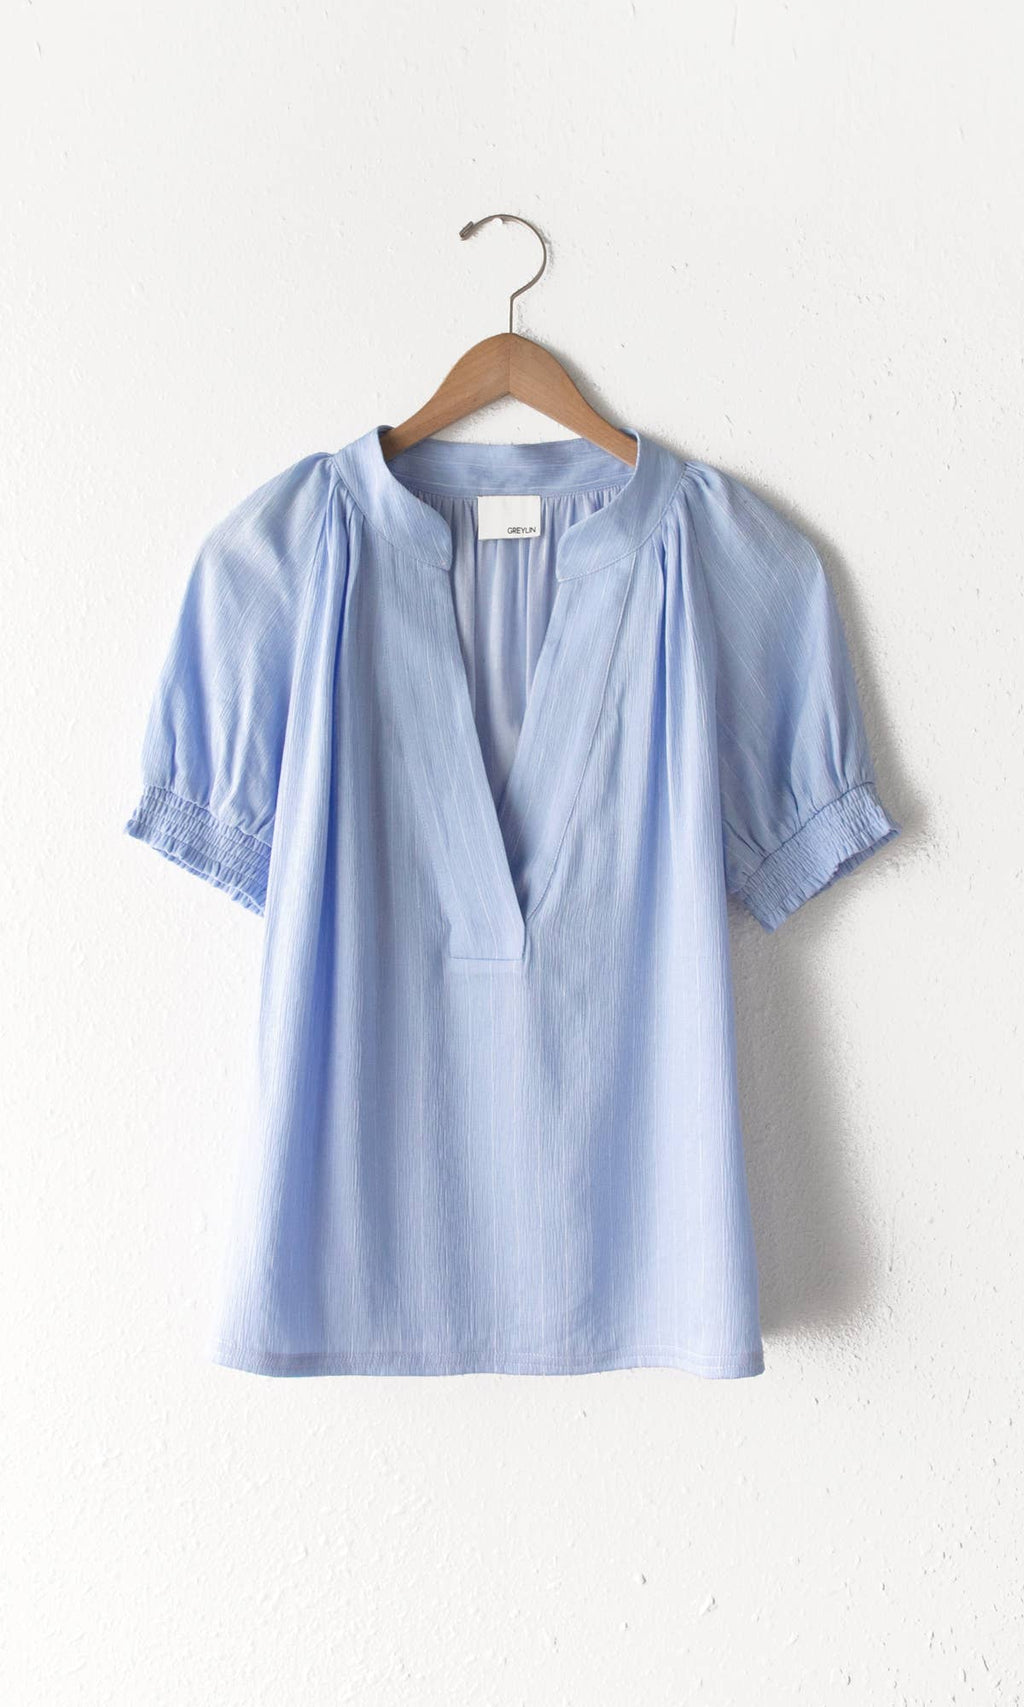 Lola Pinstriped Blouse: Small / Sky Blue